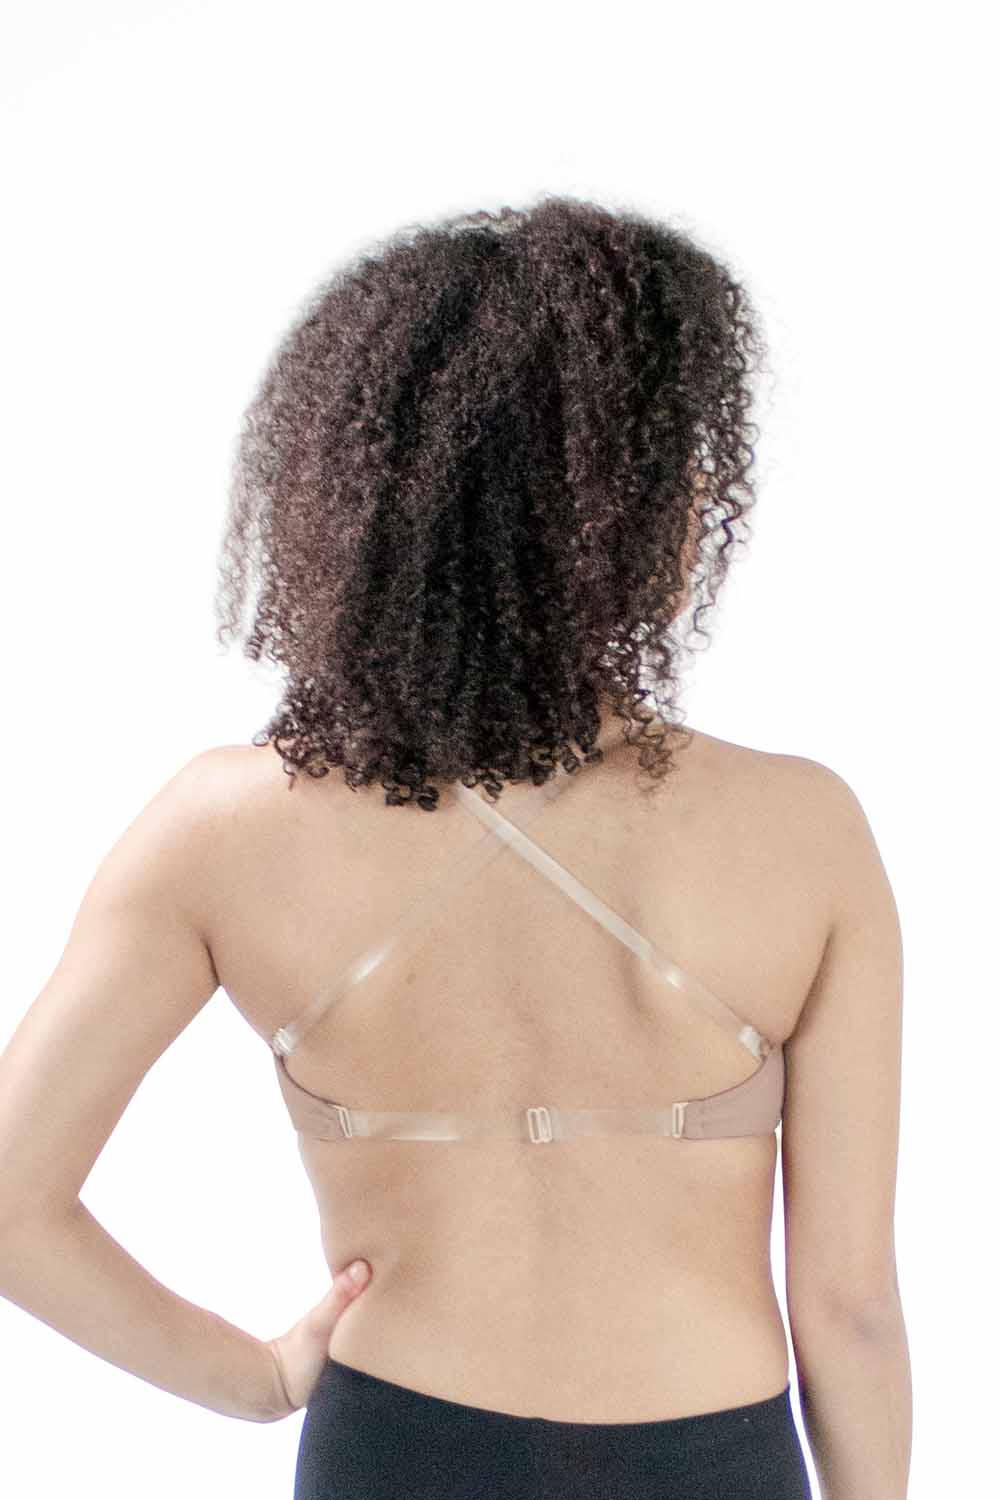 Basic Moves #4722 Adult Clear Back Seamless Bra TOP (Small) Nude at   Women's Clothing store: Athletic Underwear